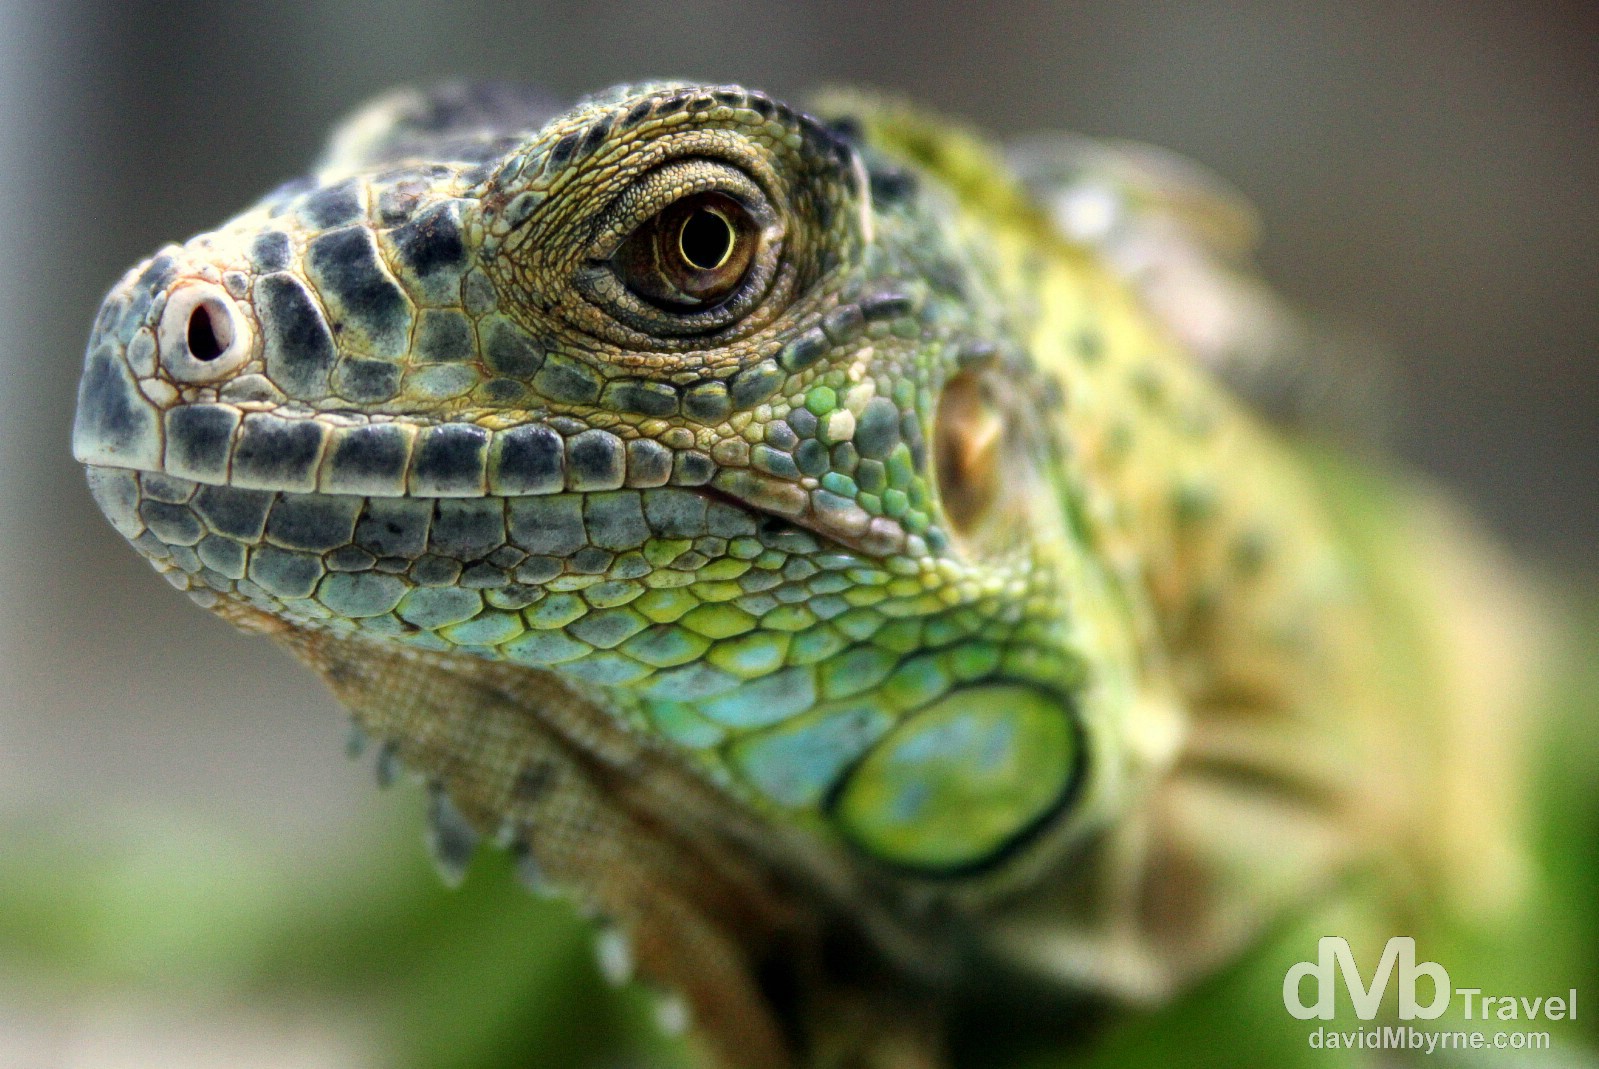 An iguana in the Snake Farm of the Temple of The Azure Cloud (aka The Snake Temple), Penang, Malaysia. March 24th 2012 